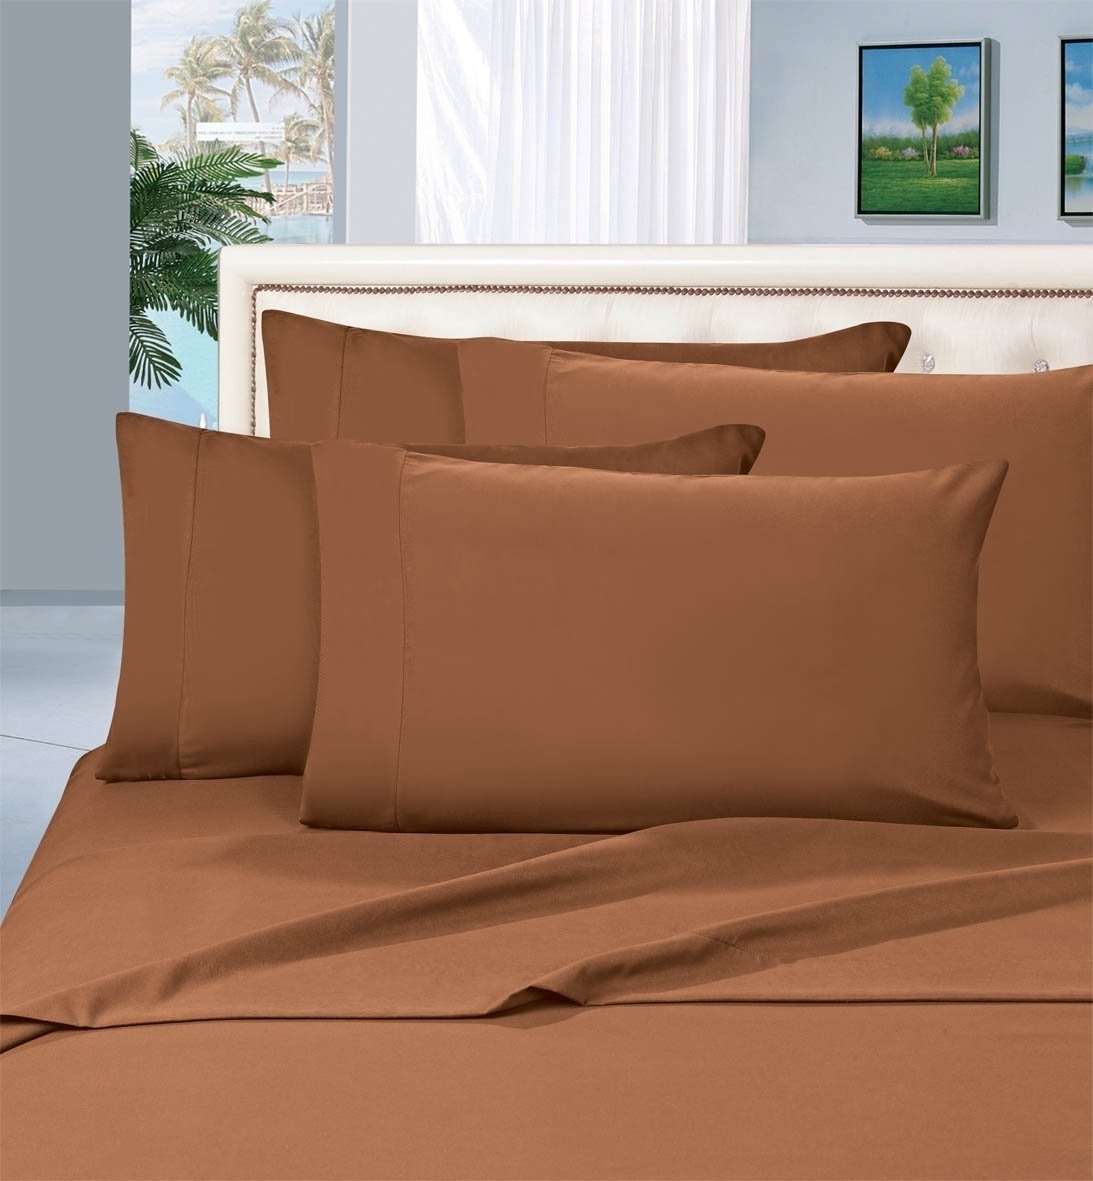 Elegant Comfort 1500 Series Wrinkle Resistant Egyptian Quality Hypoallergenic Ultra Soft Luxury 3-piece Bed Sheet Set, Twin, Bronze